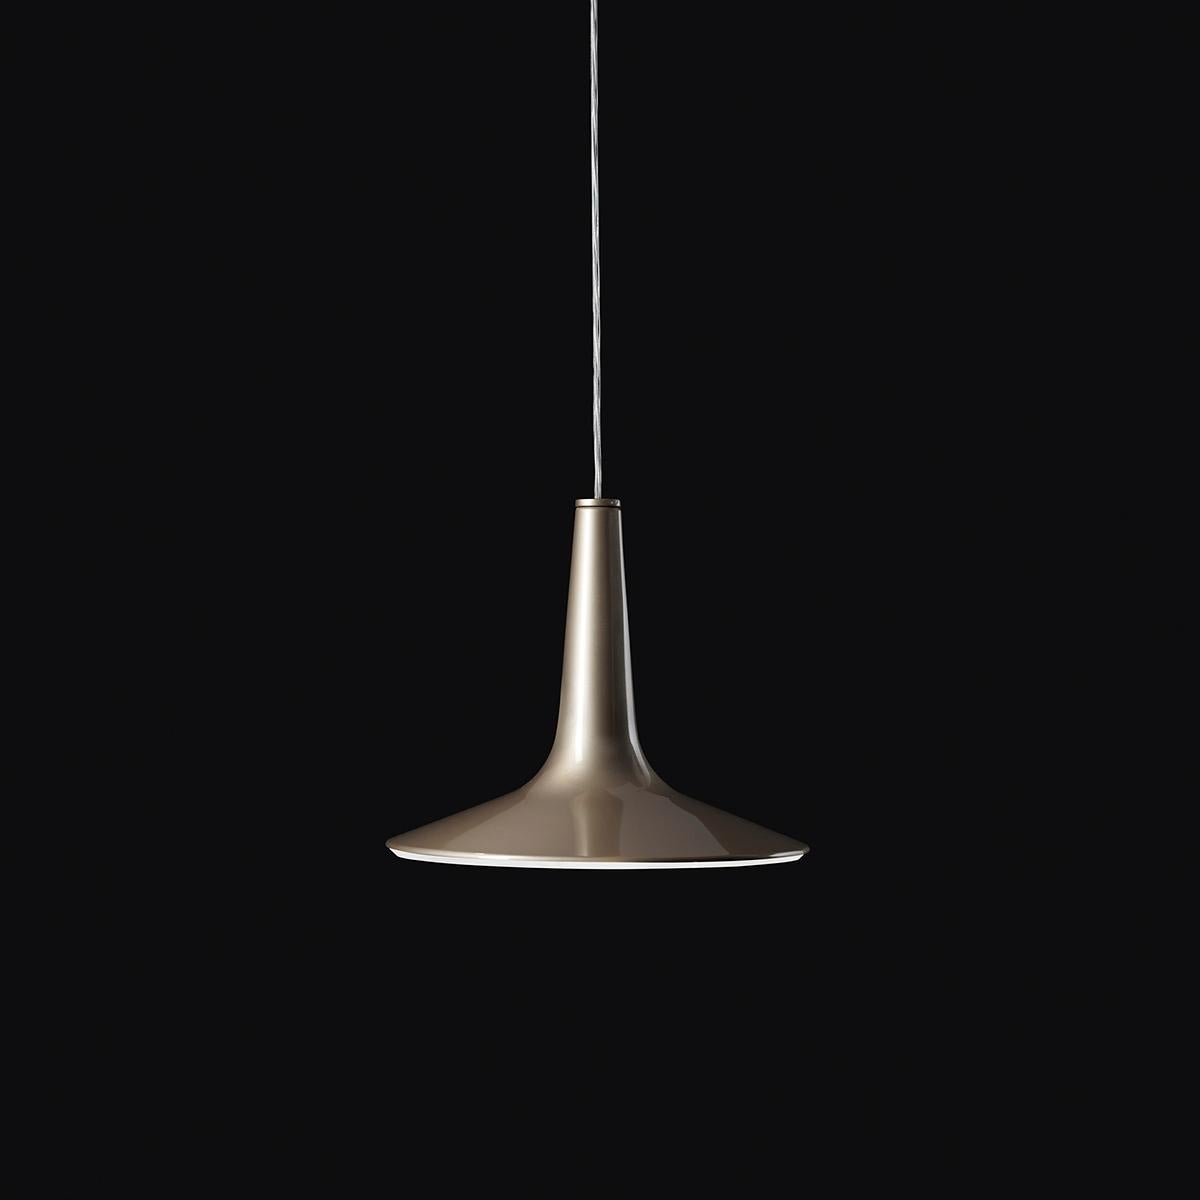 Suspension lamp 'Kin' 479 designed by Francesco Rota in 2013.
Suspension lamp giving direct and diffused light. Metal turned body lamp. PMMA transparent diffuser. Manufactured by Oluce, Italy.

A cast aluminum body with a Led core are the